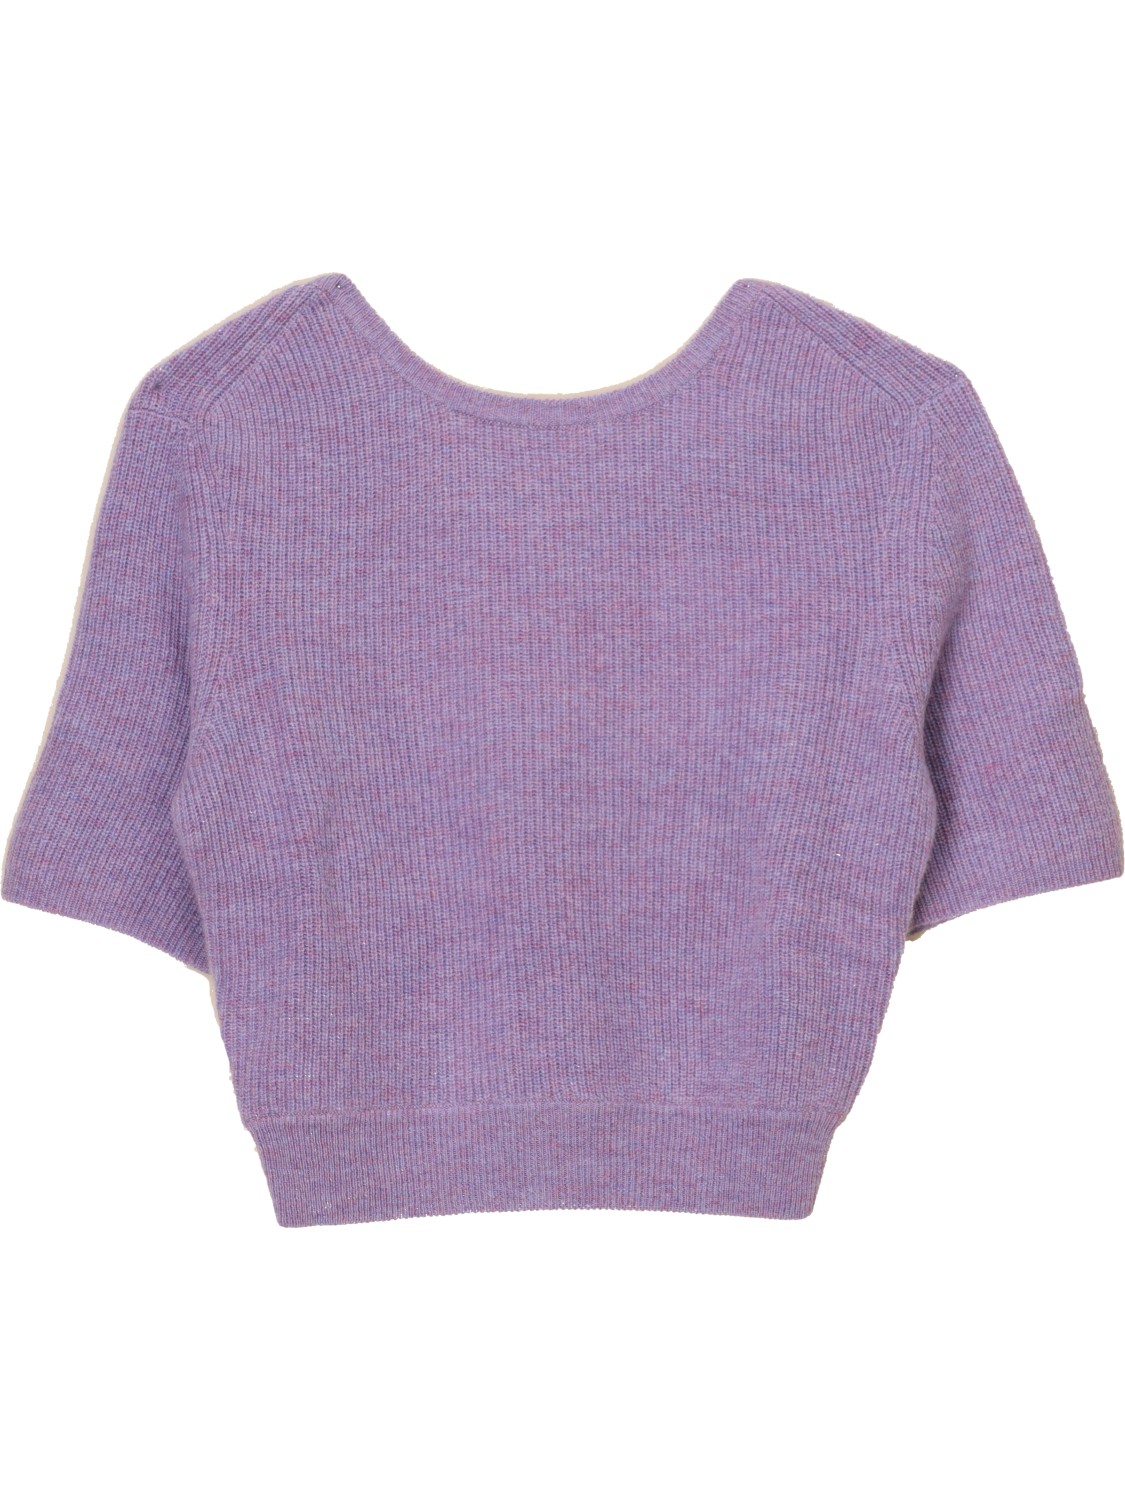 Josefina - Short-sleeved cashmere sweater with cut-out at the back 